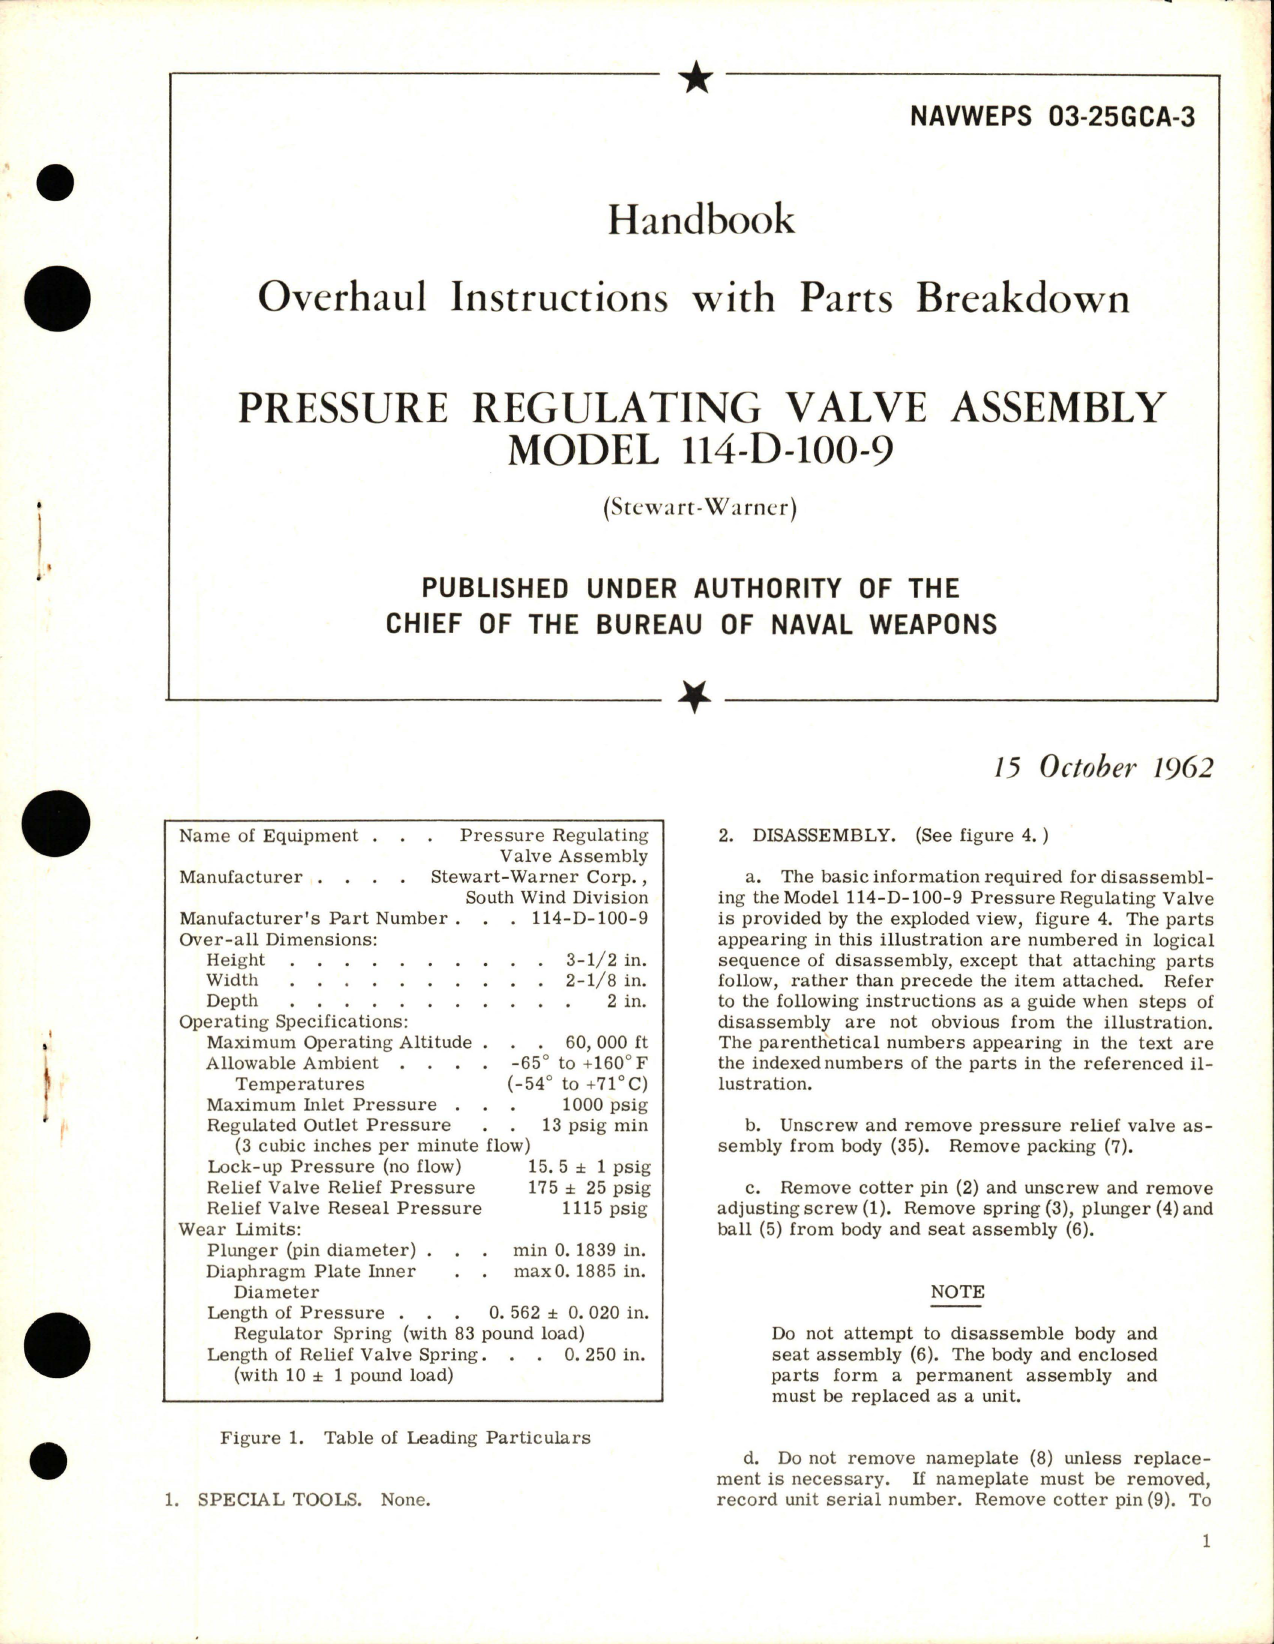 Sample page 1 from AirCorps Library document: Overhaul Instructions with Parts Breakdown for Pressure Regulating Valve Assembly - Model 114-D-100-9 